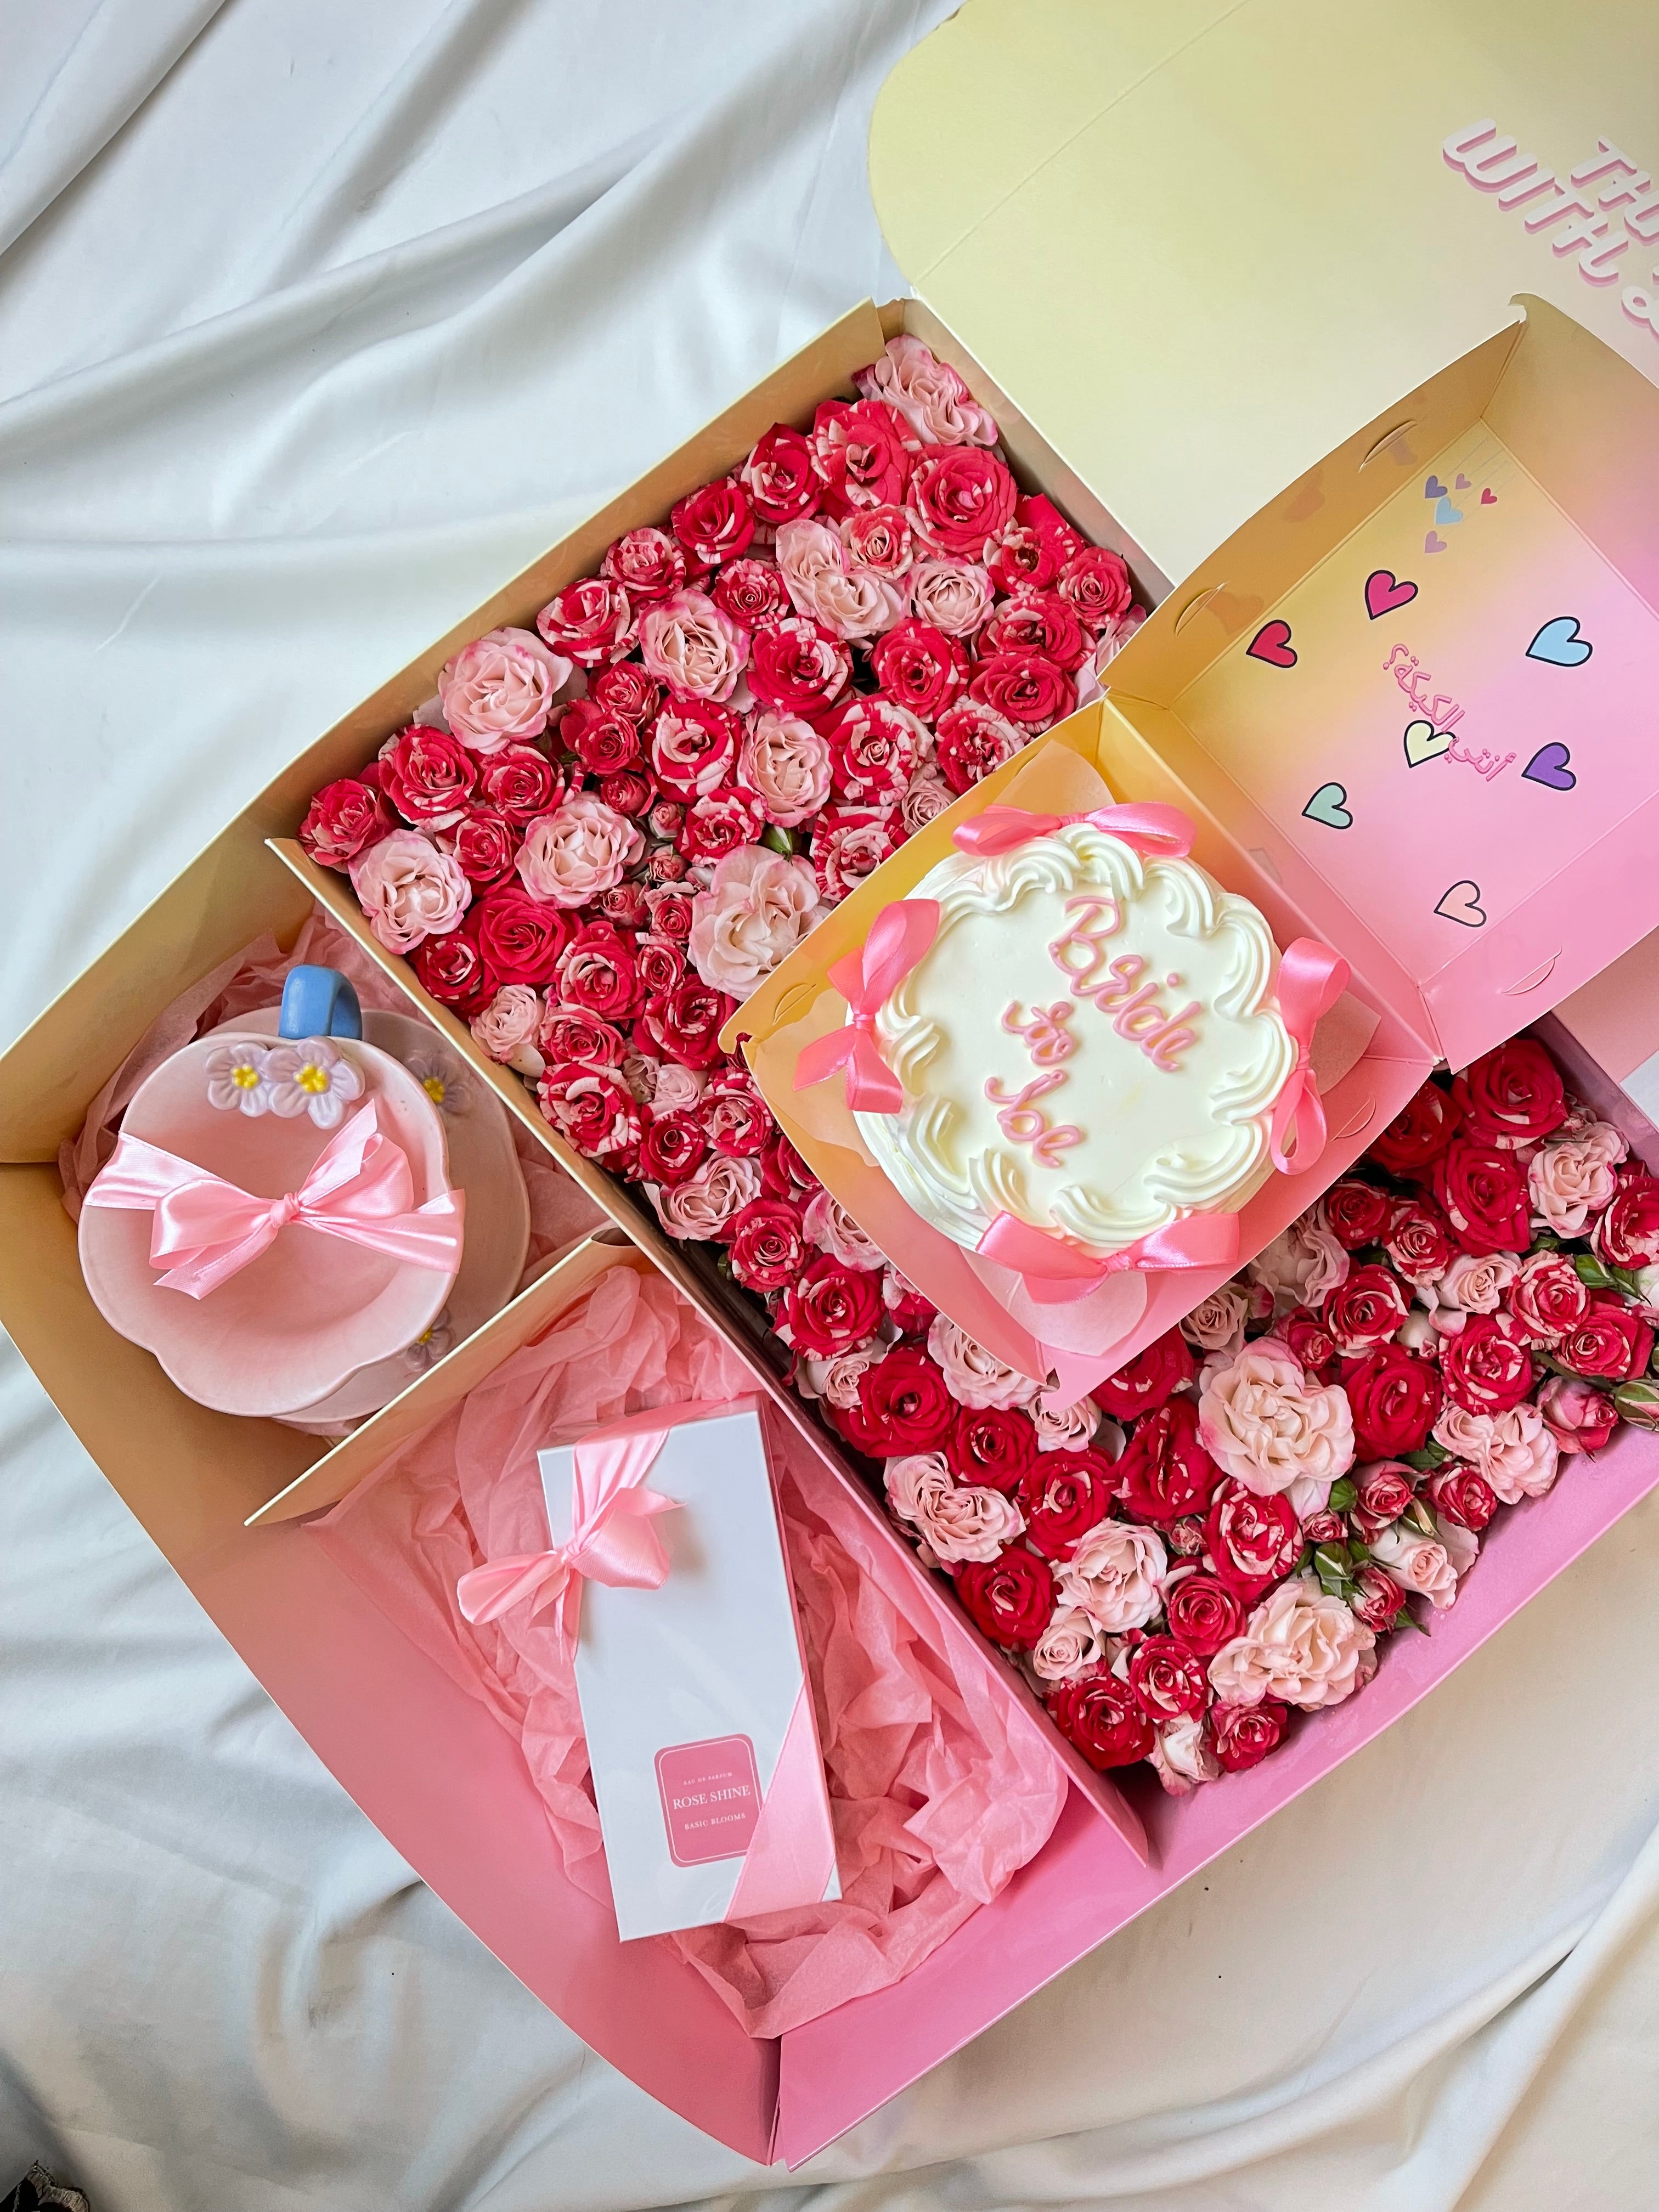 Bride to be flowers box💕